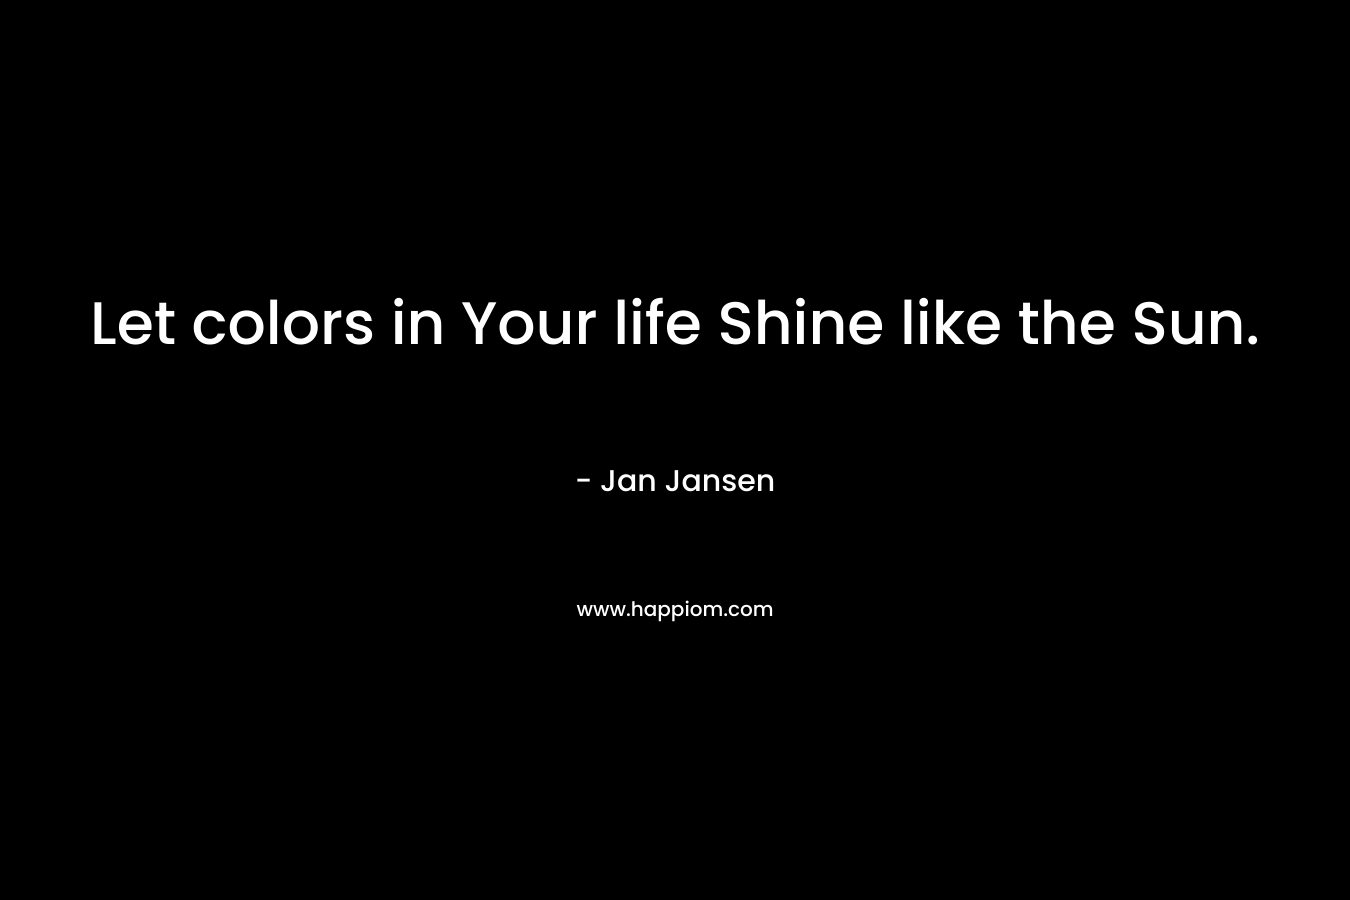 Let colors in Your life Shine like the Sun.